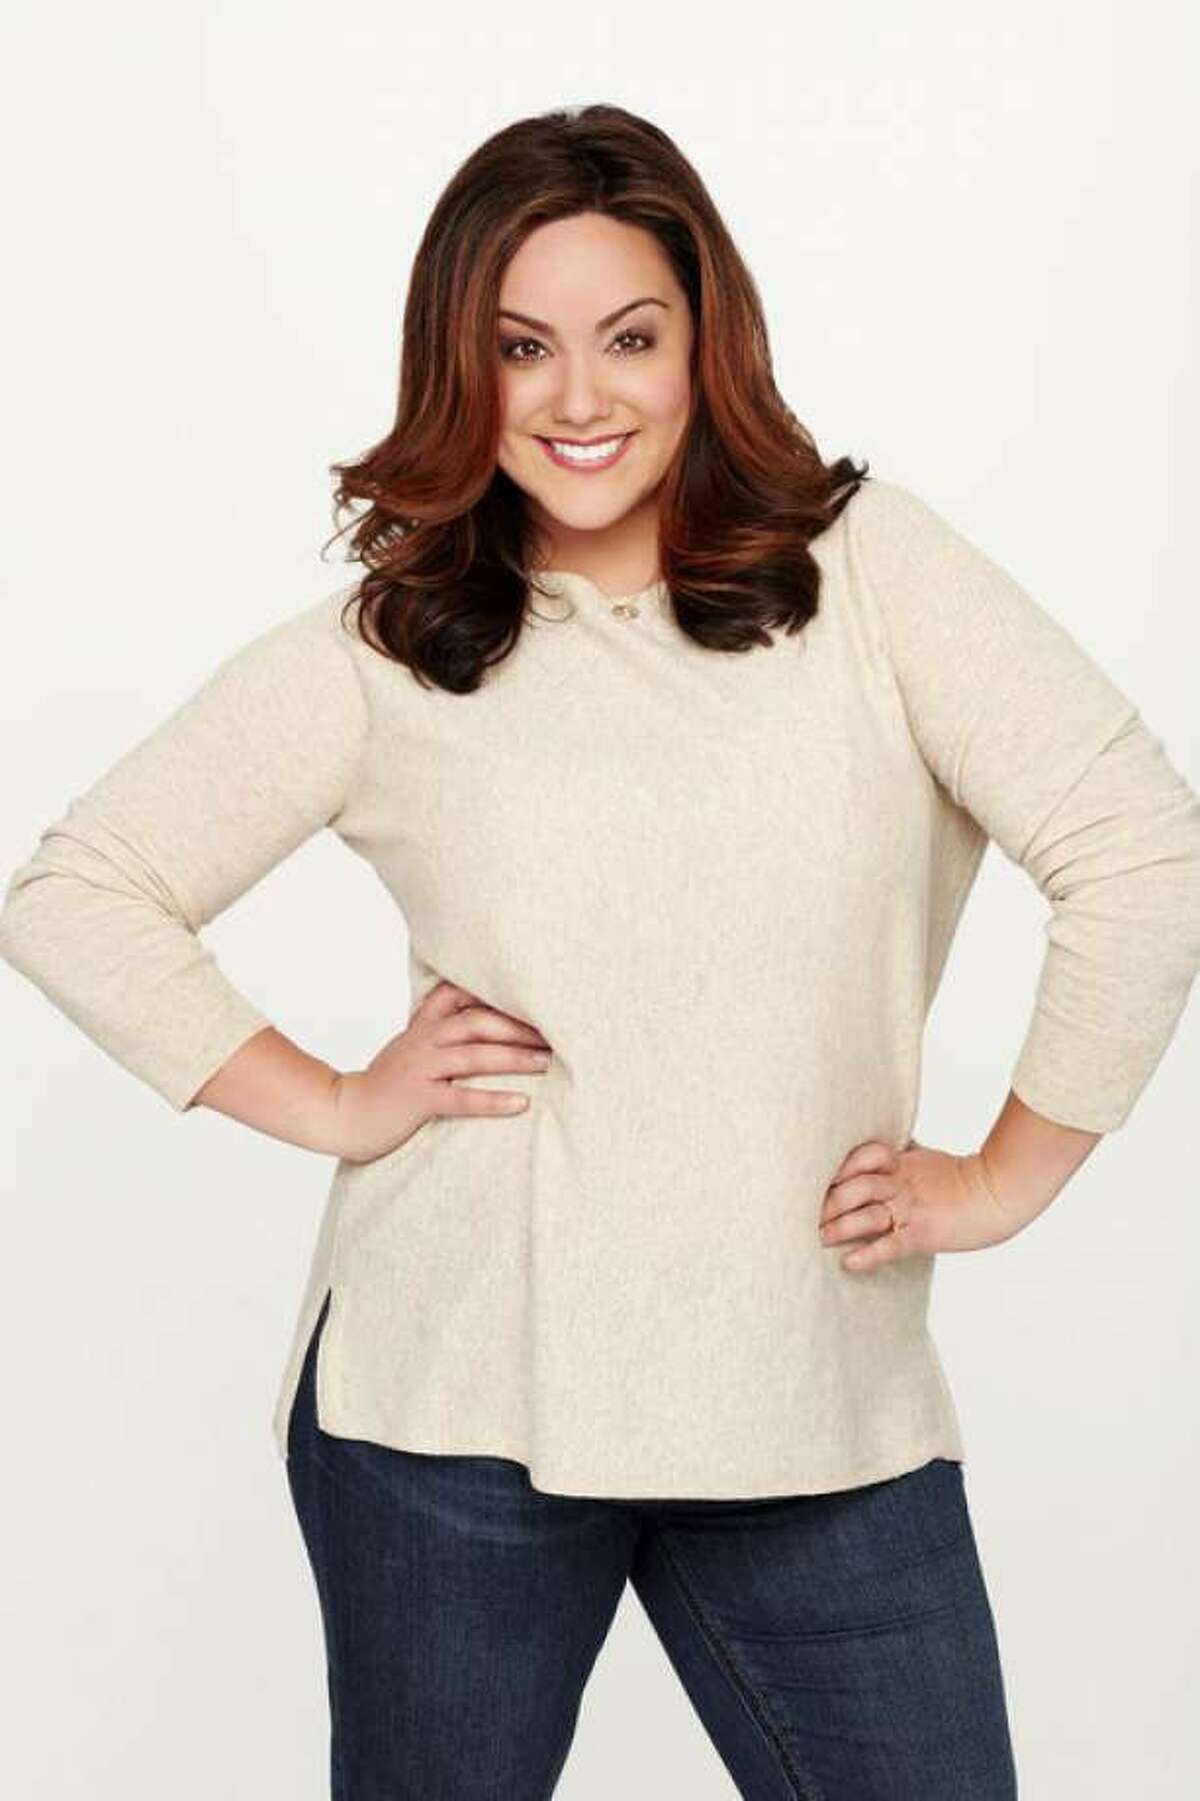 ABC has announced that the show, previously titled “The Second Fattest Housewife in Westport,” would be re-titled “American Housewife.” According to ABC’s web site, the show stars Katy Mixon (of “Mike and Molly,” and “Eastbound and Down”) as Katie Otto,” a confident, unapologetic wife and mother of three, raises her flawed family in the wealthy town of Westport, Connecticut, filled with ‘perfect’ mommies and their ‘perfect’ offspring.”